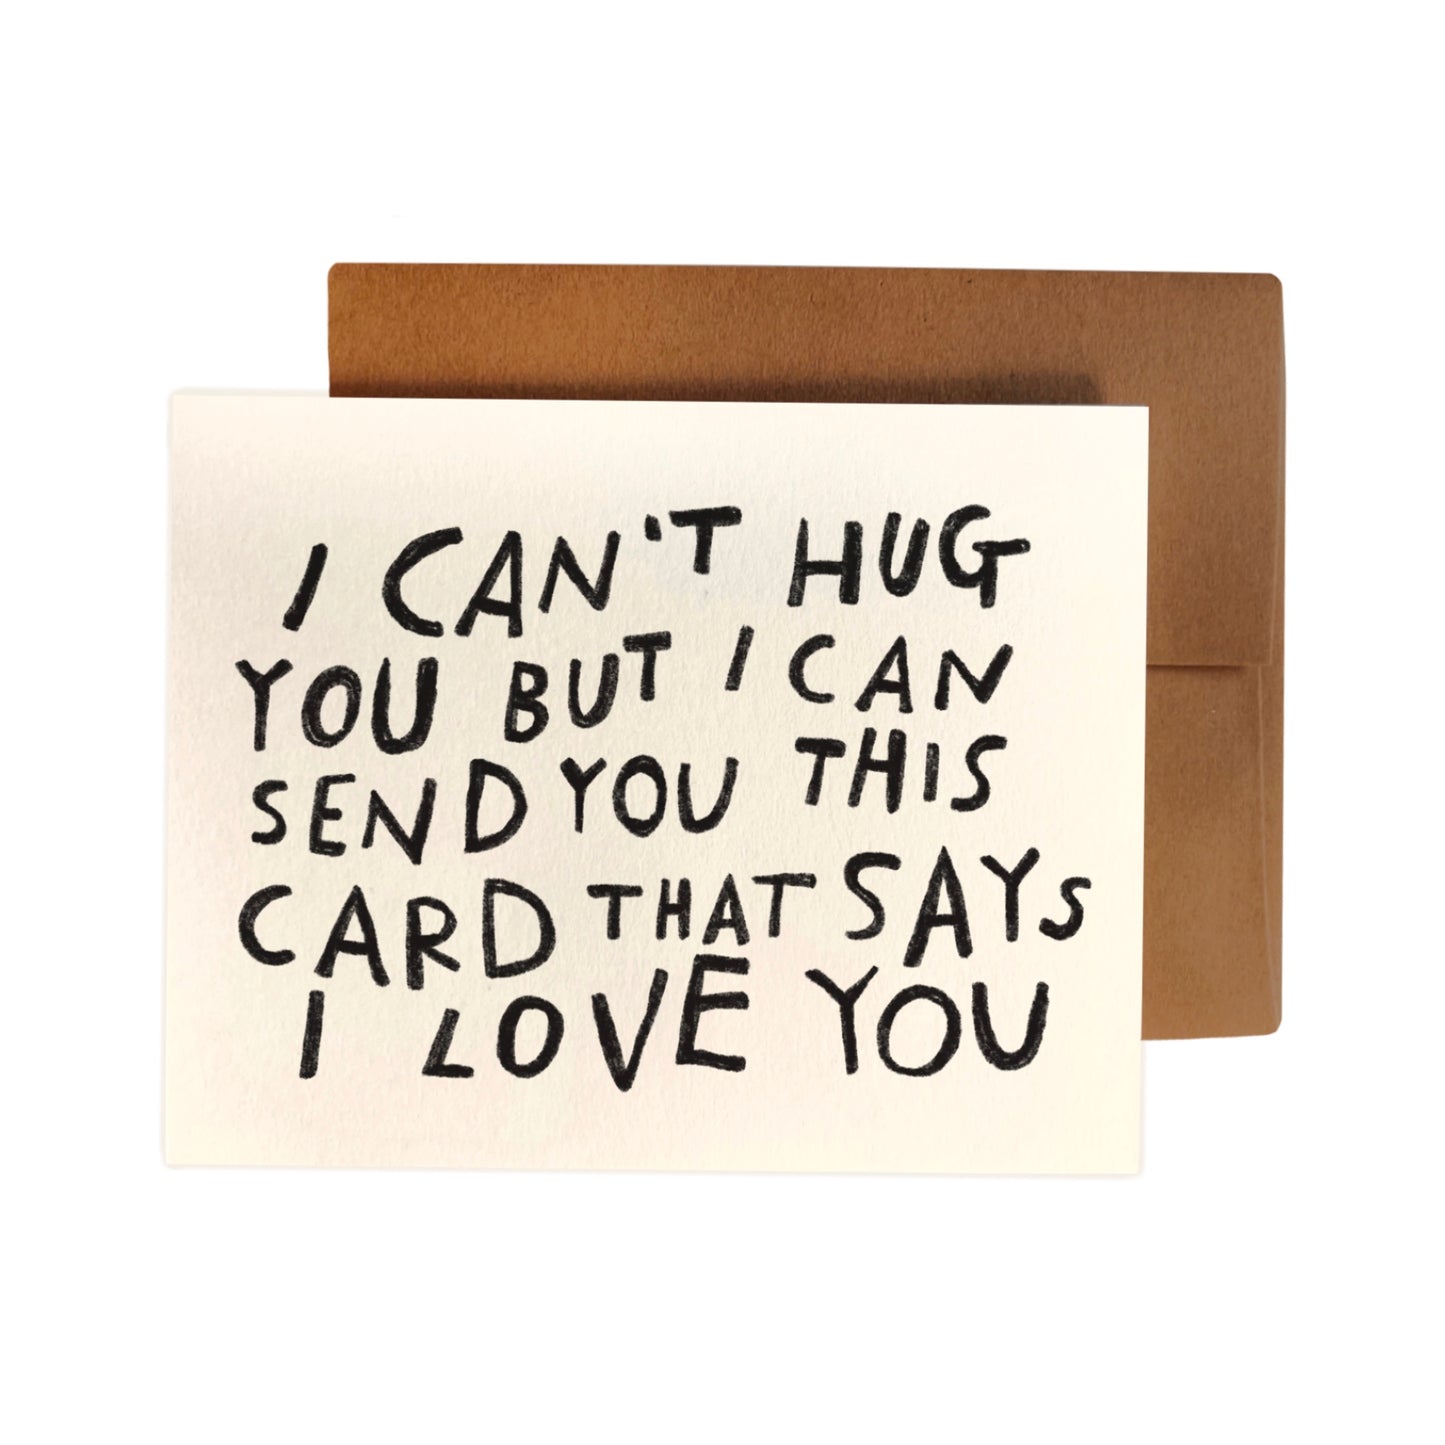 CAN'T HUG YOU CARD